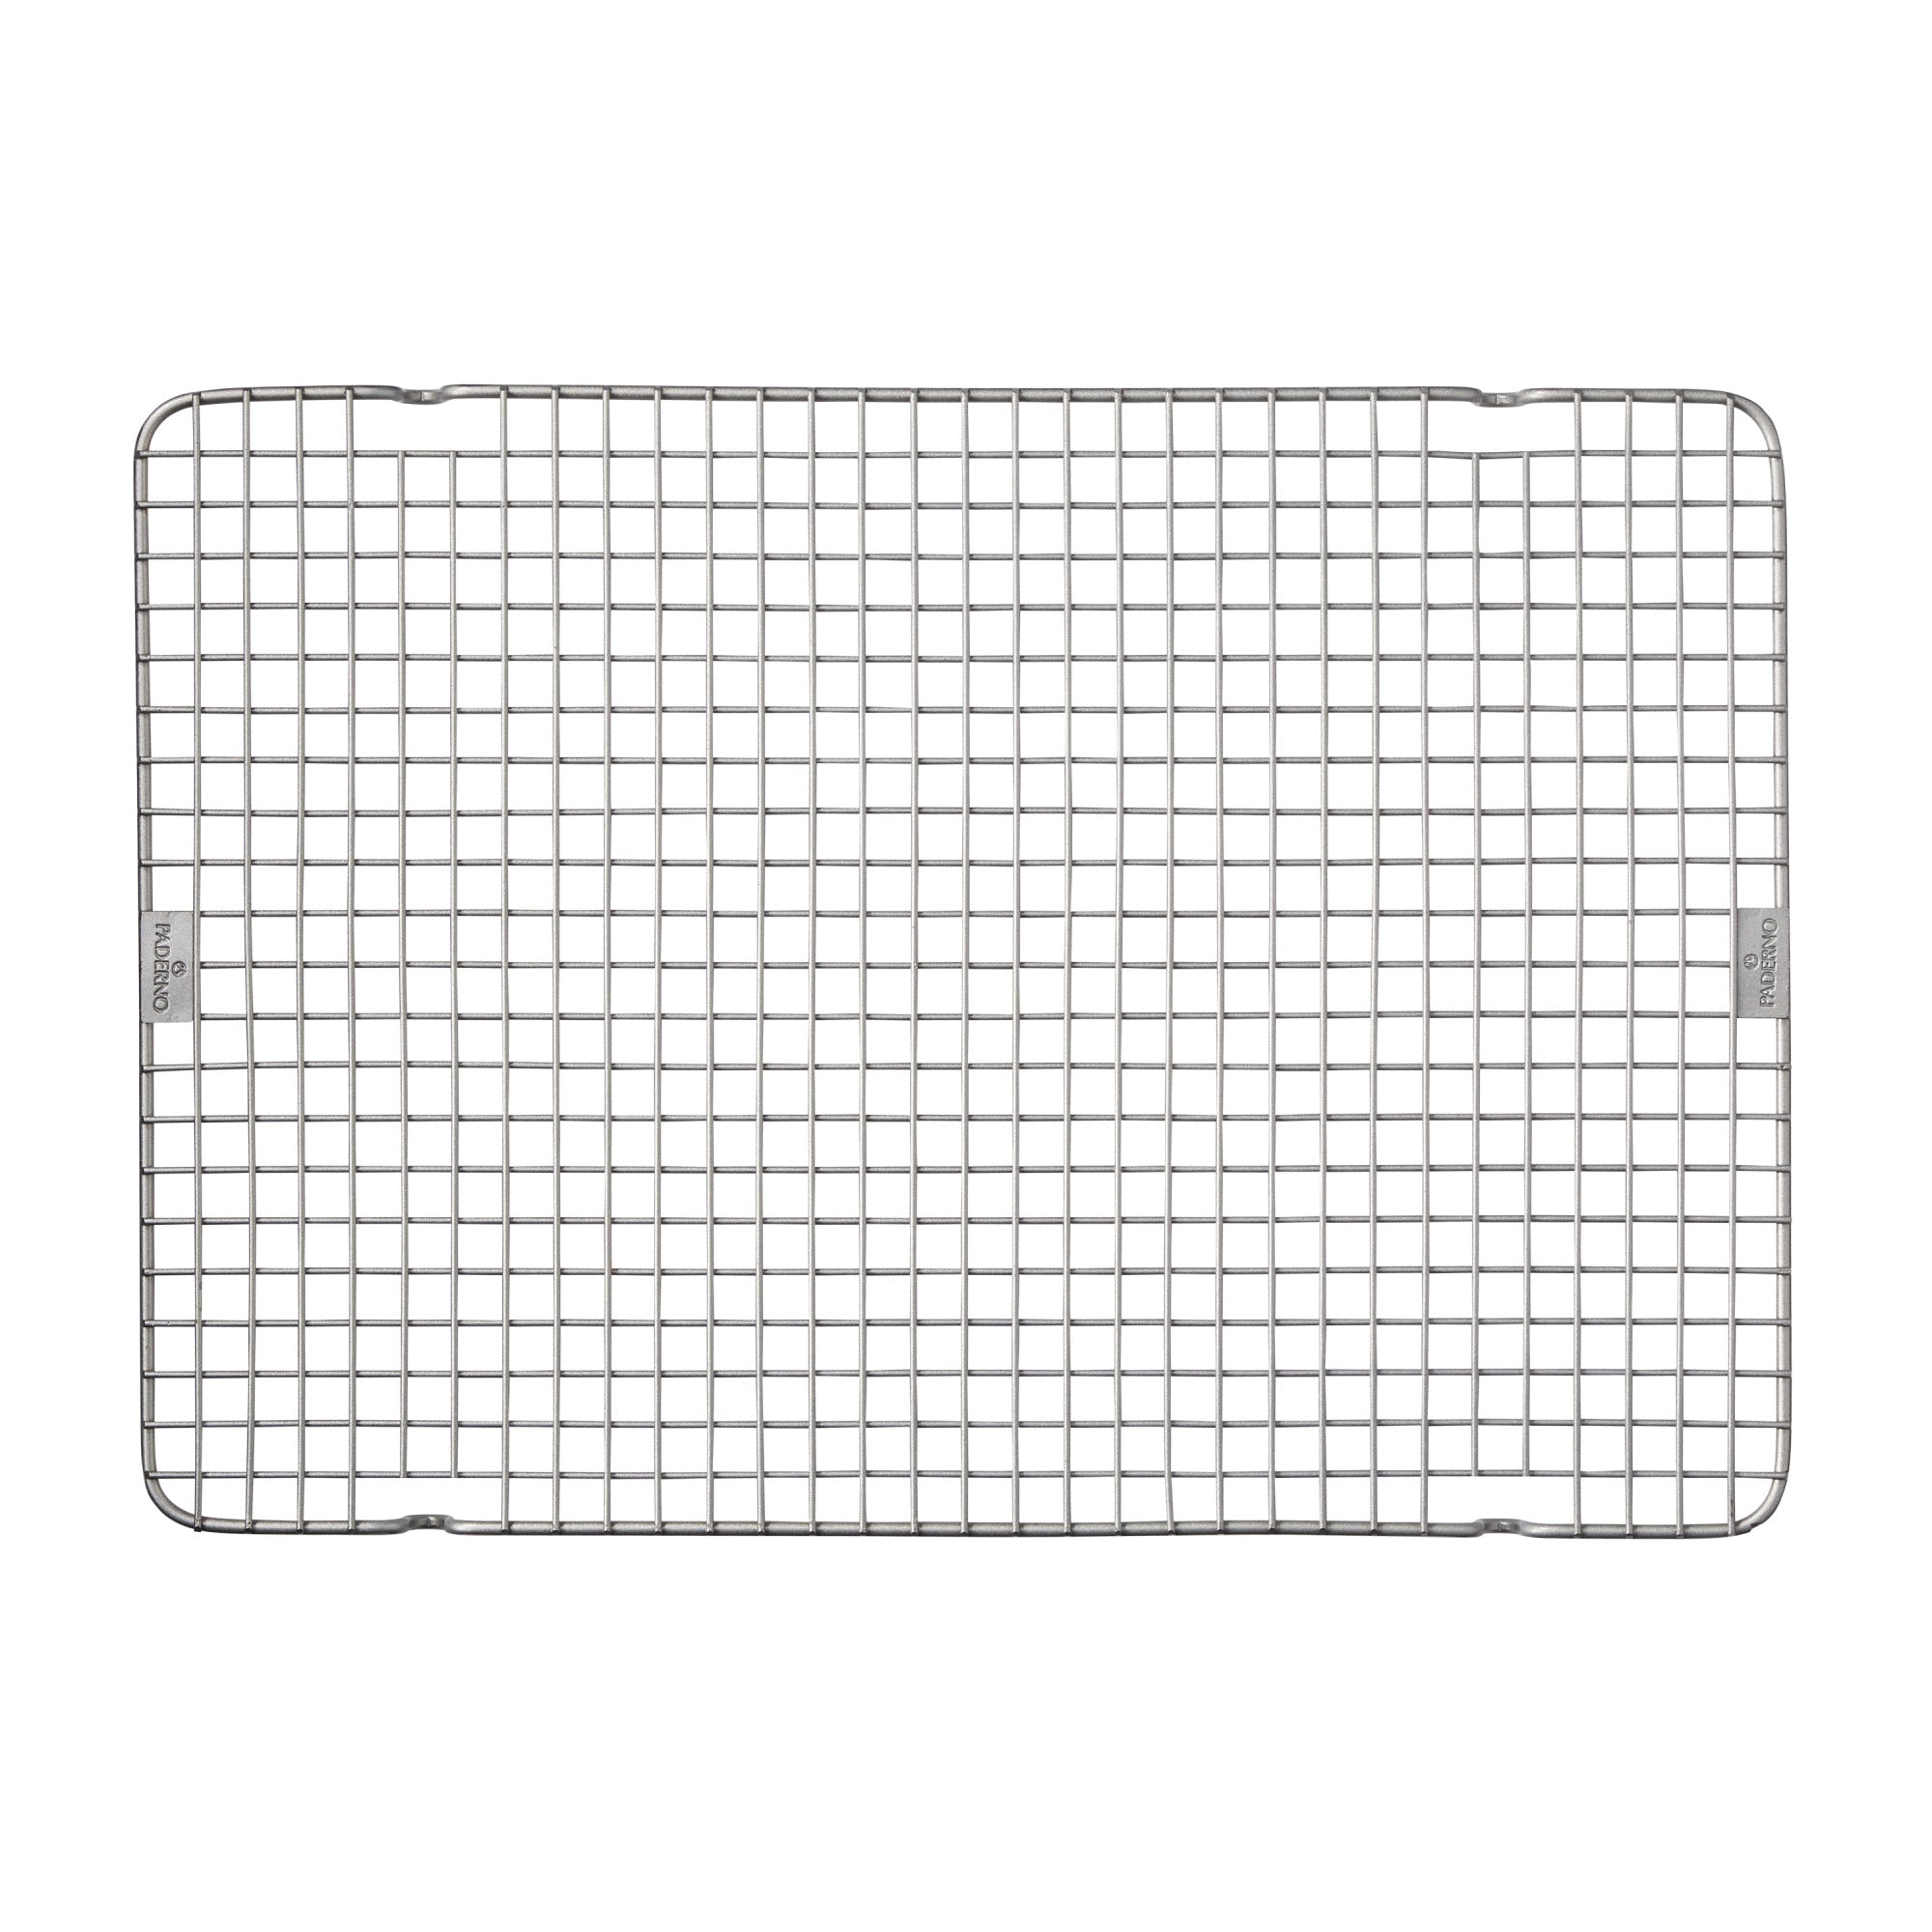 Chef Pomodoro Non-Stick Baking Sheet and Cooling Rack Set (15.0 x